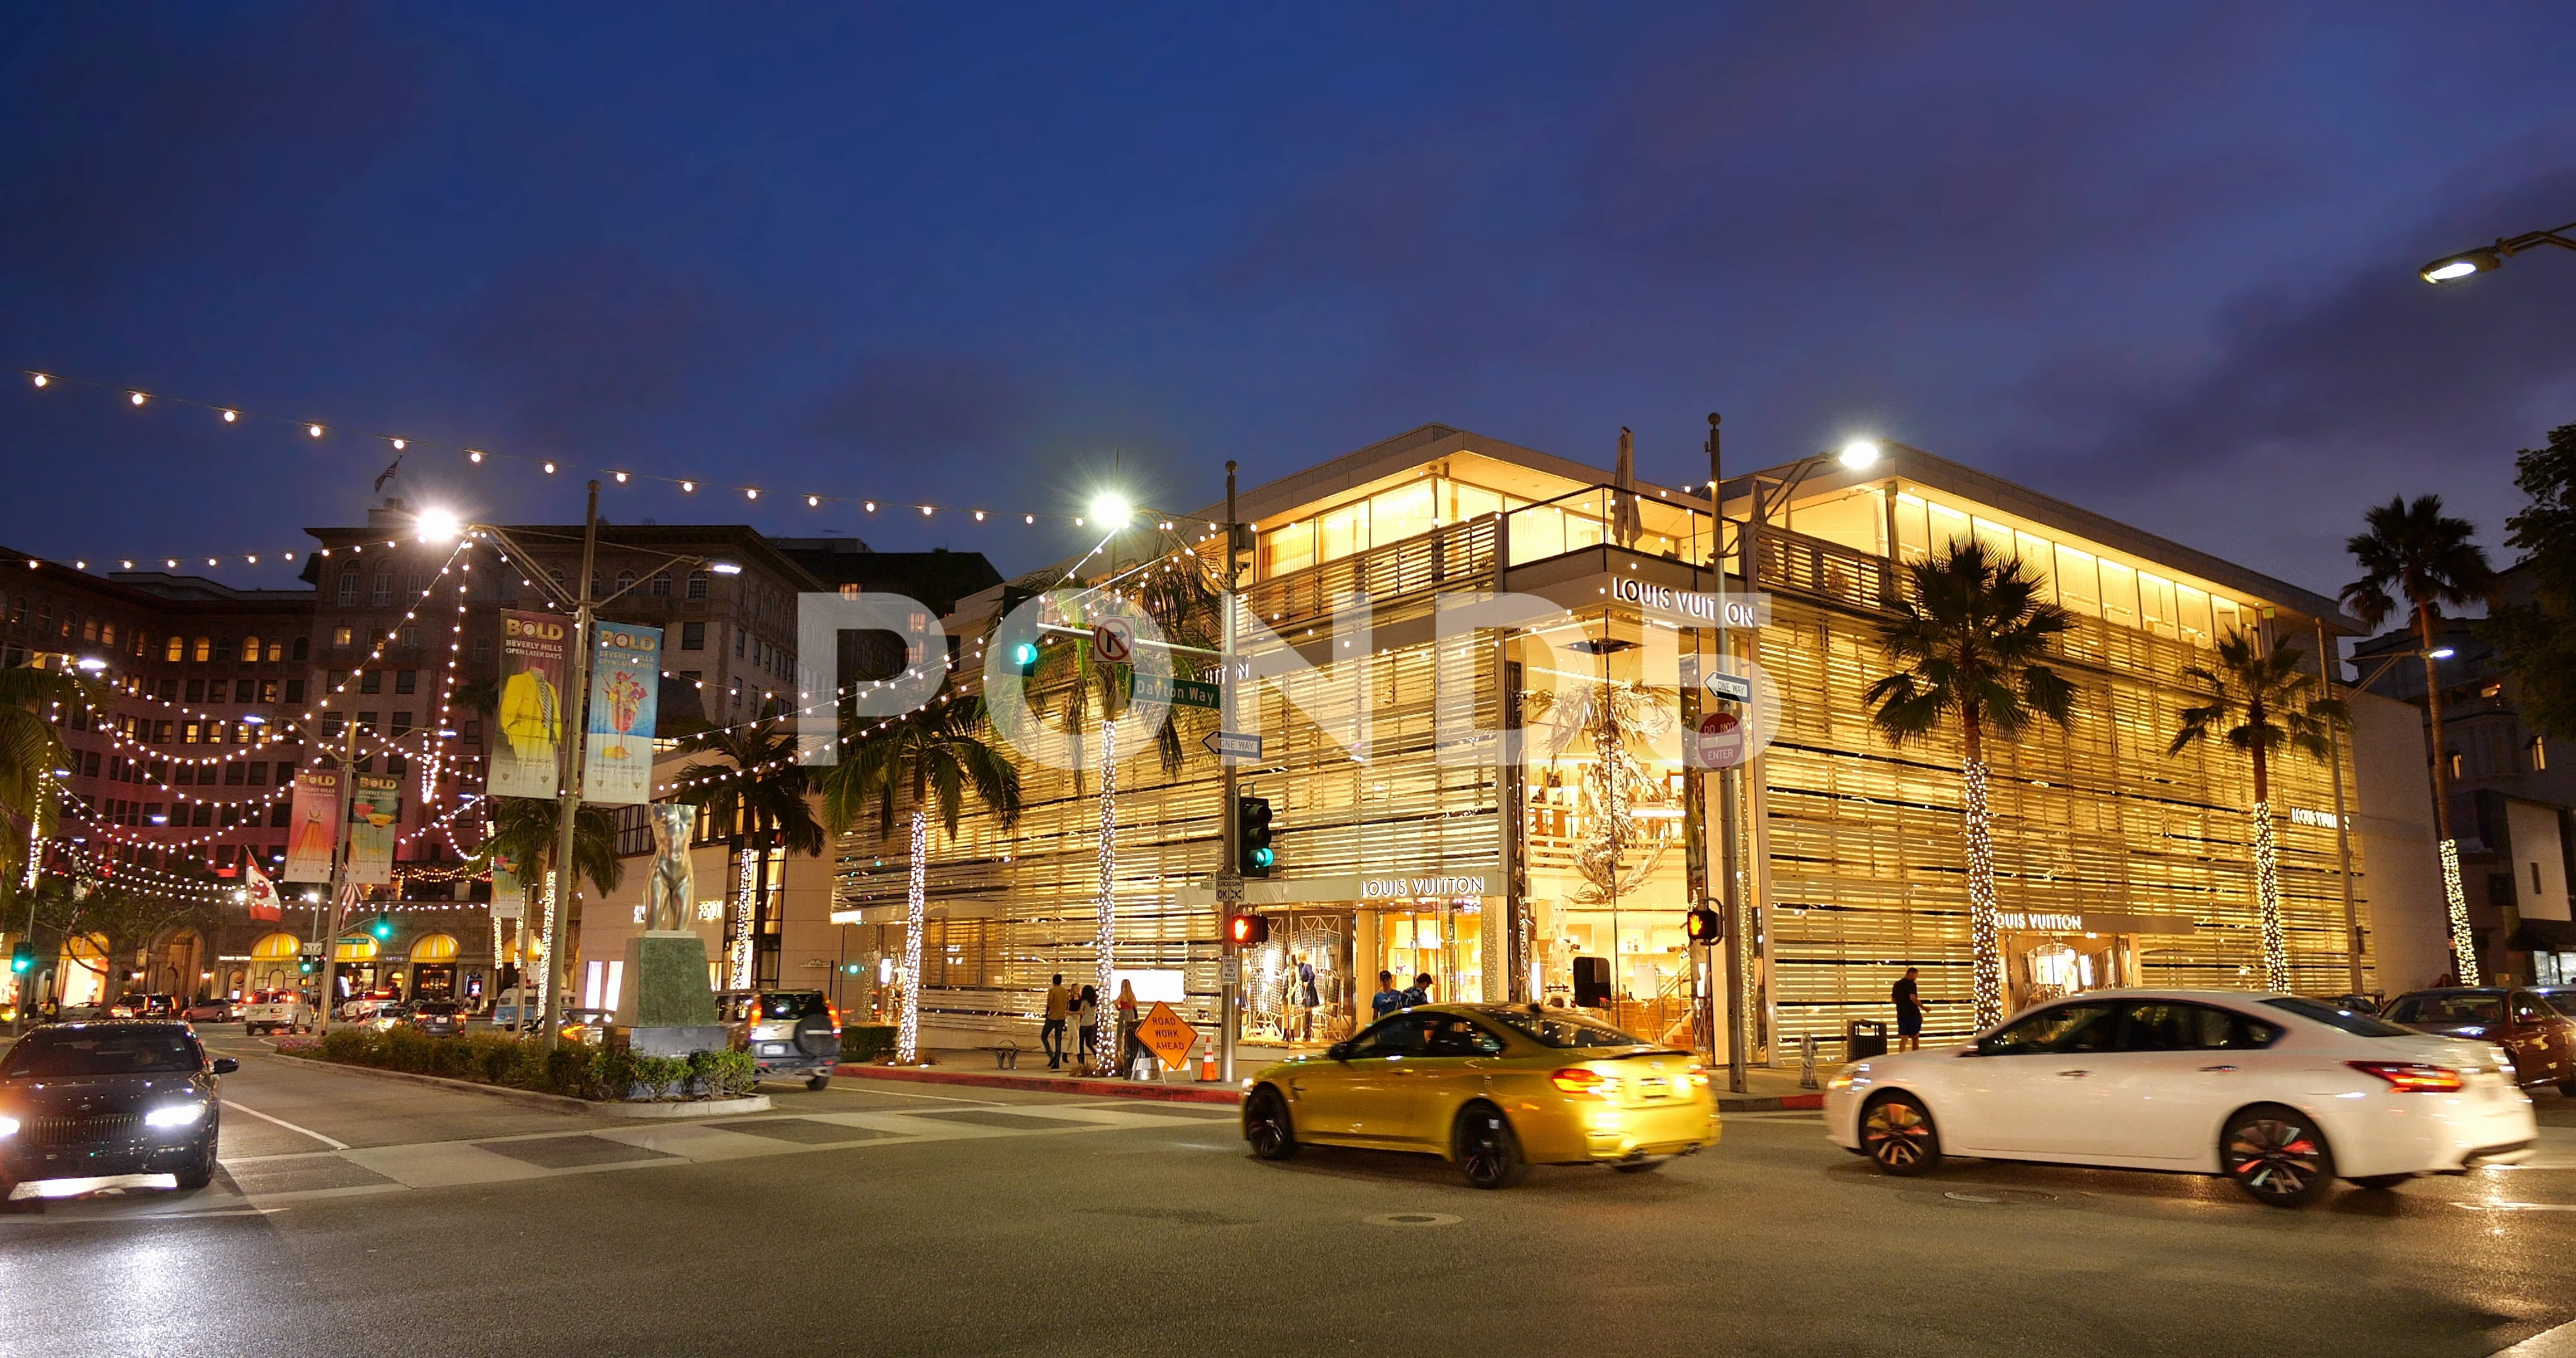 Louis Vuitton Store On Rodeo Drive Los Angeles Stock Photo